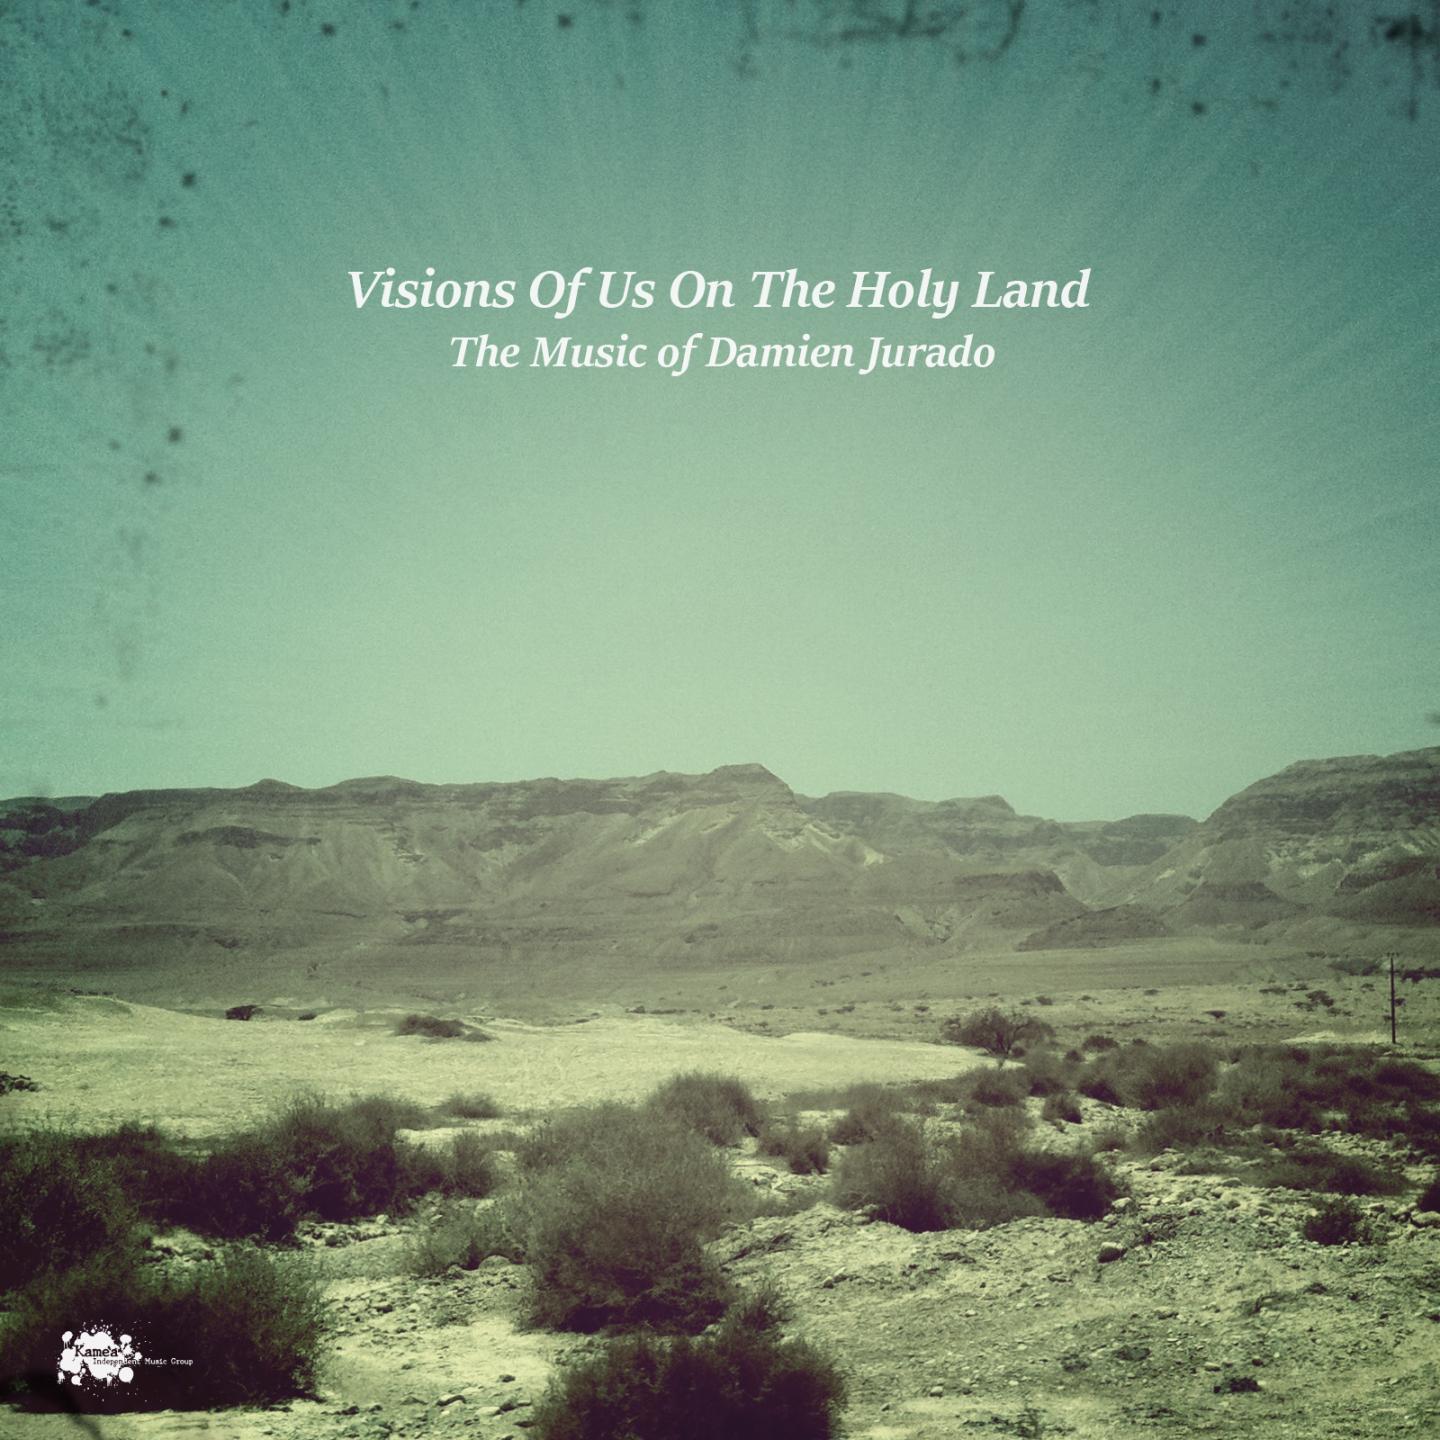 Visions of Us on the Holy Land (The Music of Damien Jurado)